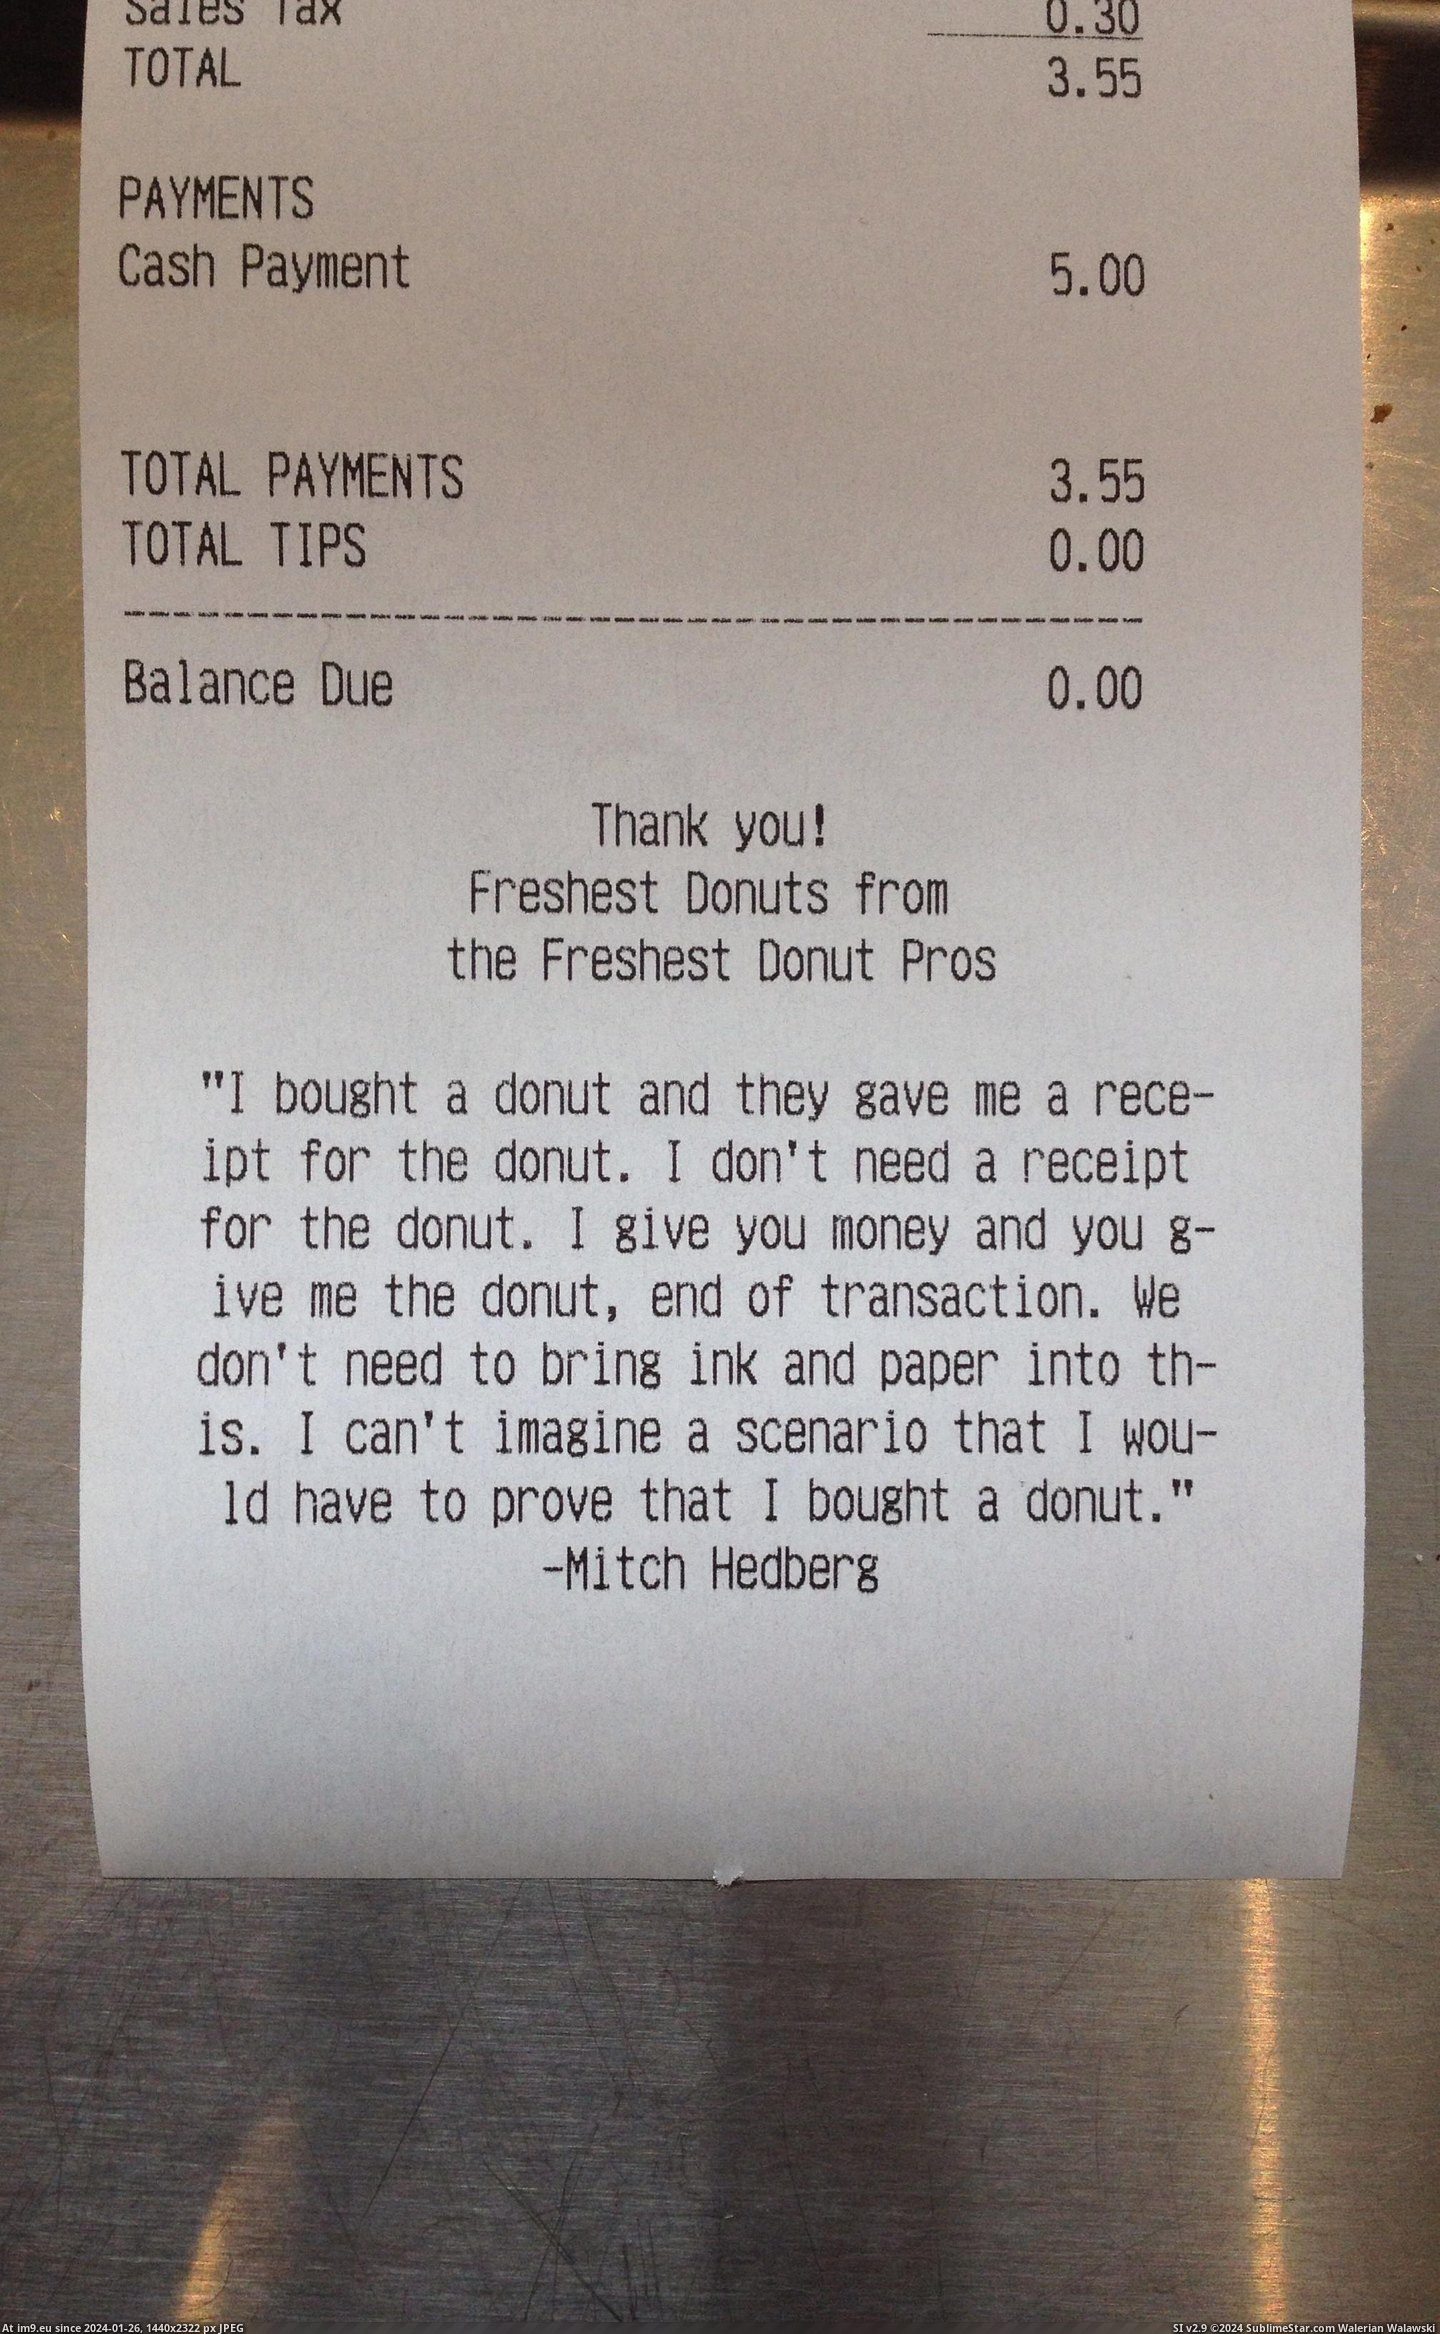 #Funny #Was #Work #Ability #Doughnut #Firs #Receipts #Shop #Control #Printed [Funny] I was given the ability to control what gets printed on the receipts at the doughnut shop where I work. This is the firs Pic. (Изображение из альбом My r/FUNNY favs))